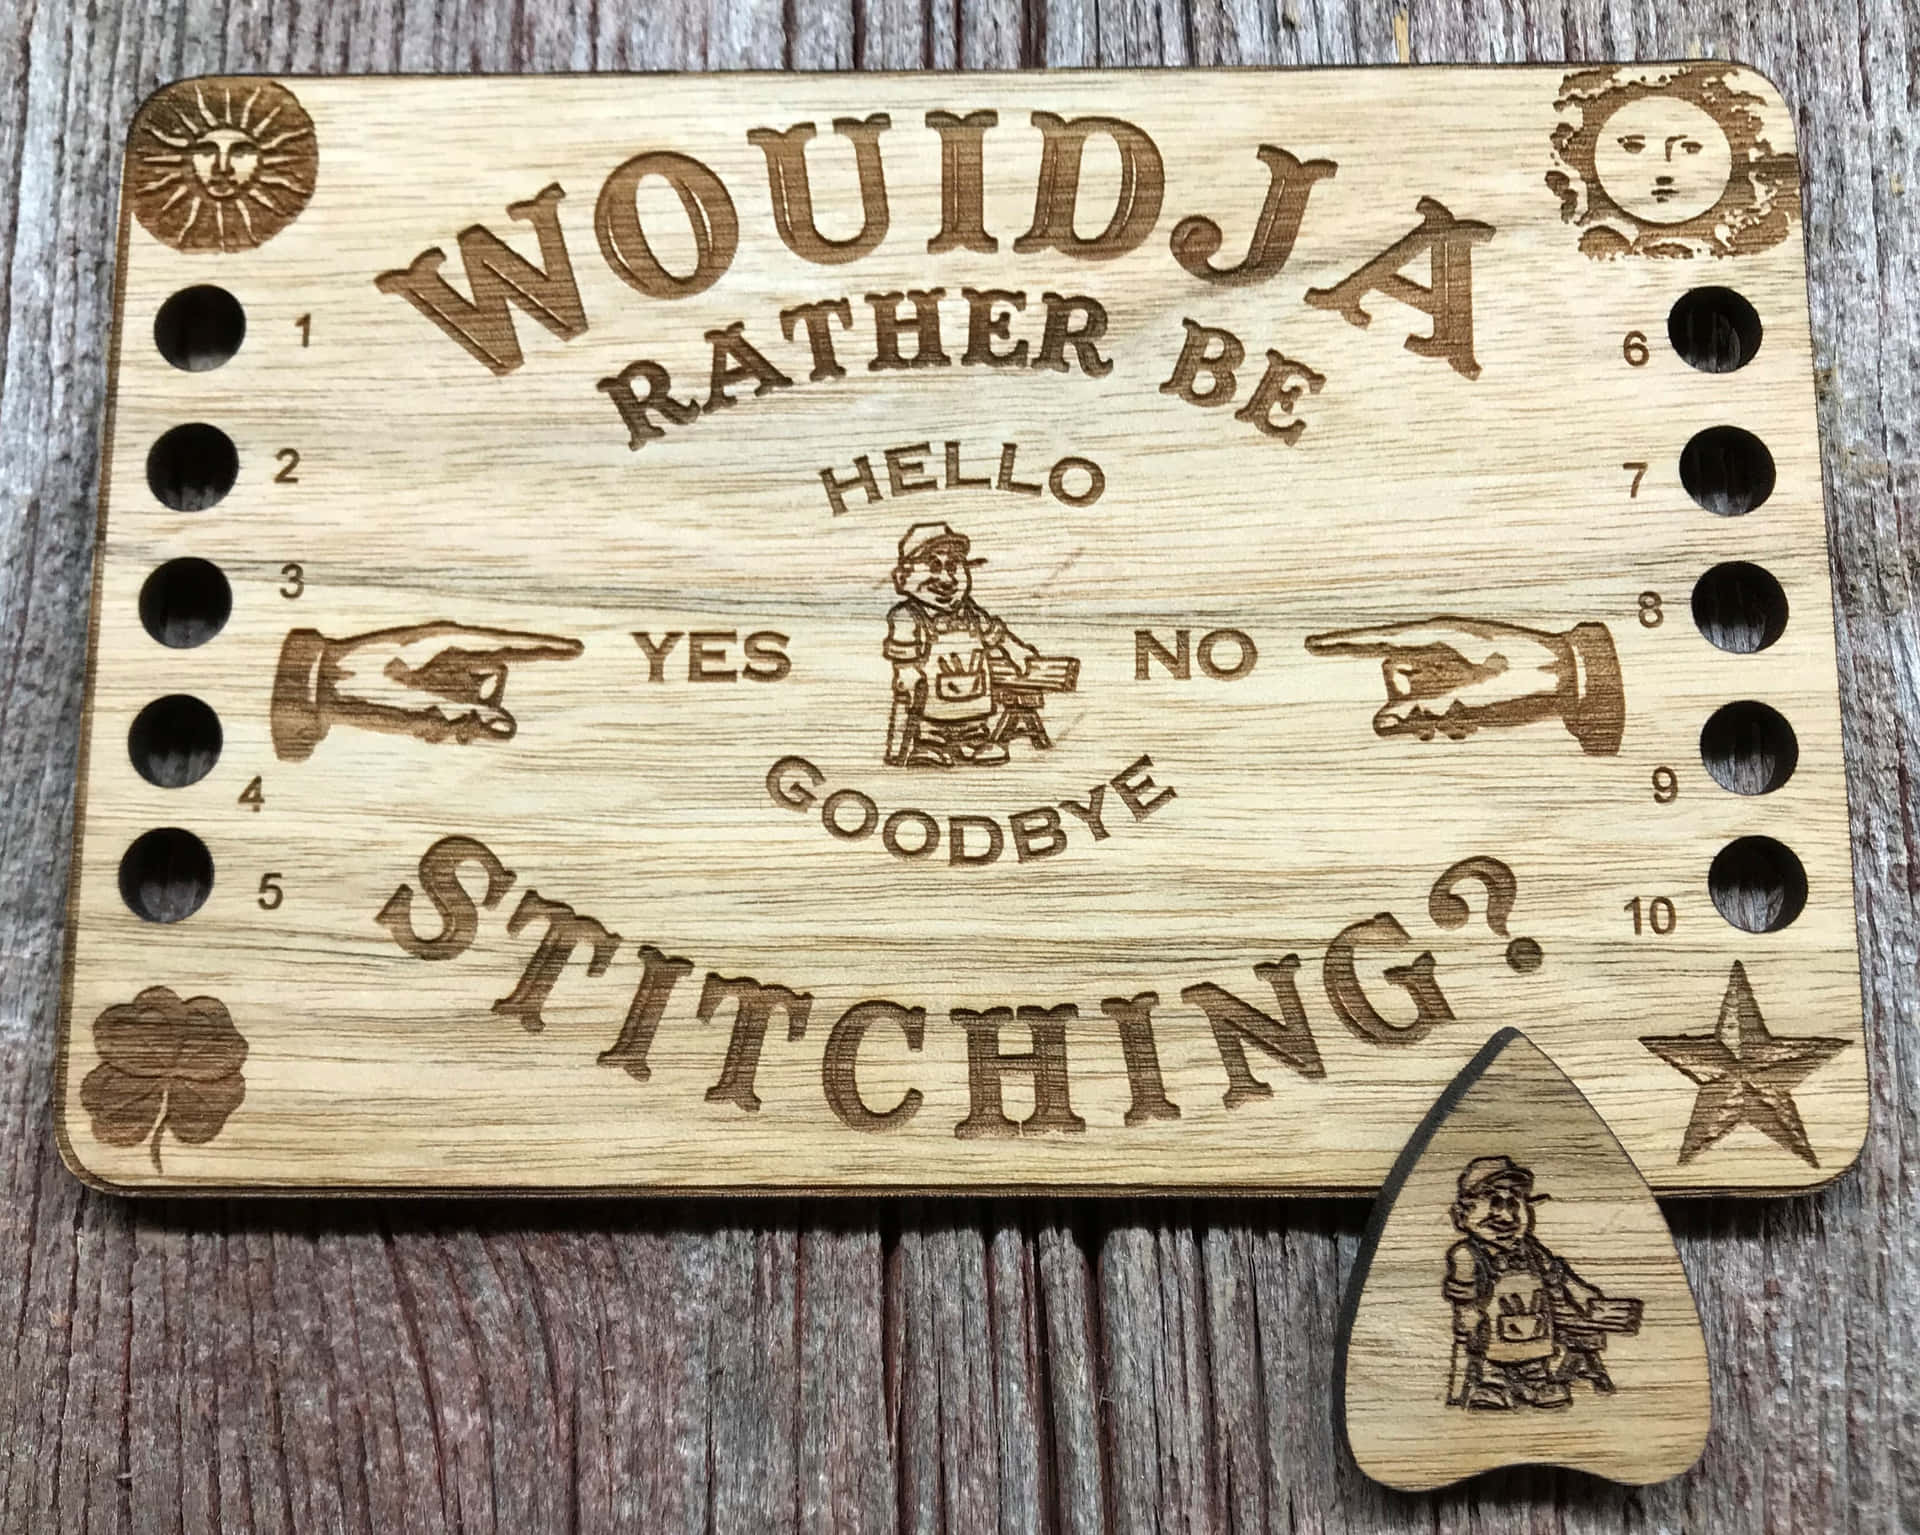 Wouldja Rather Be Here No Stitching? Wooden Jigsaw Puzzle